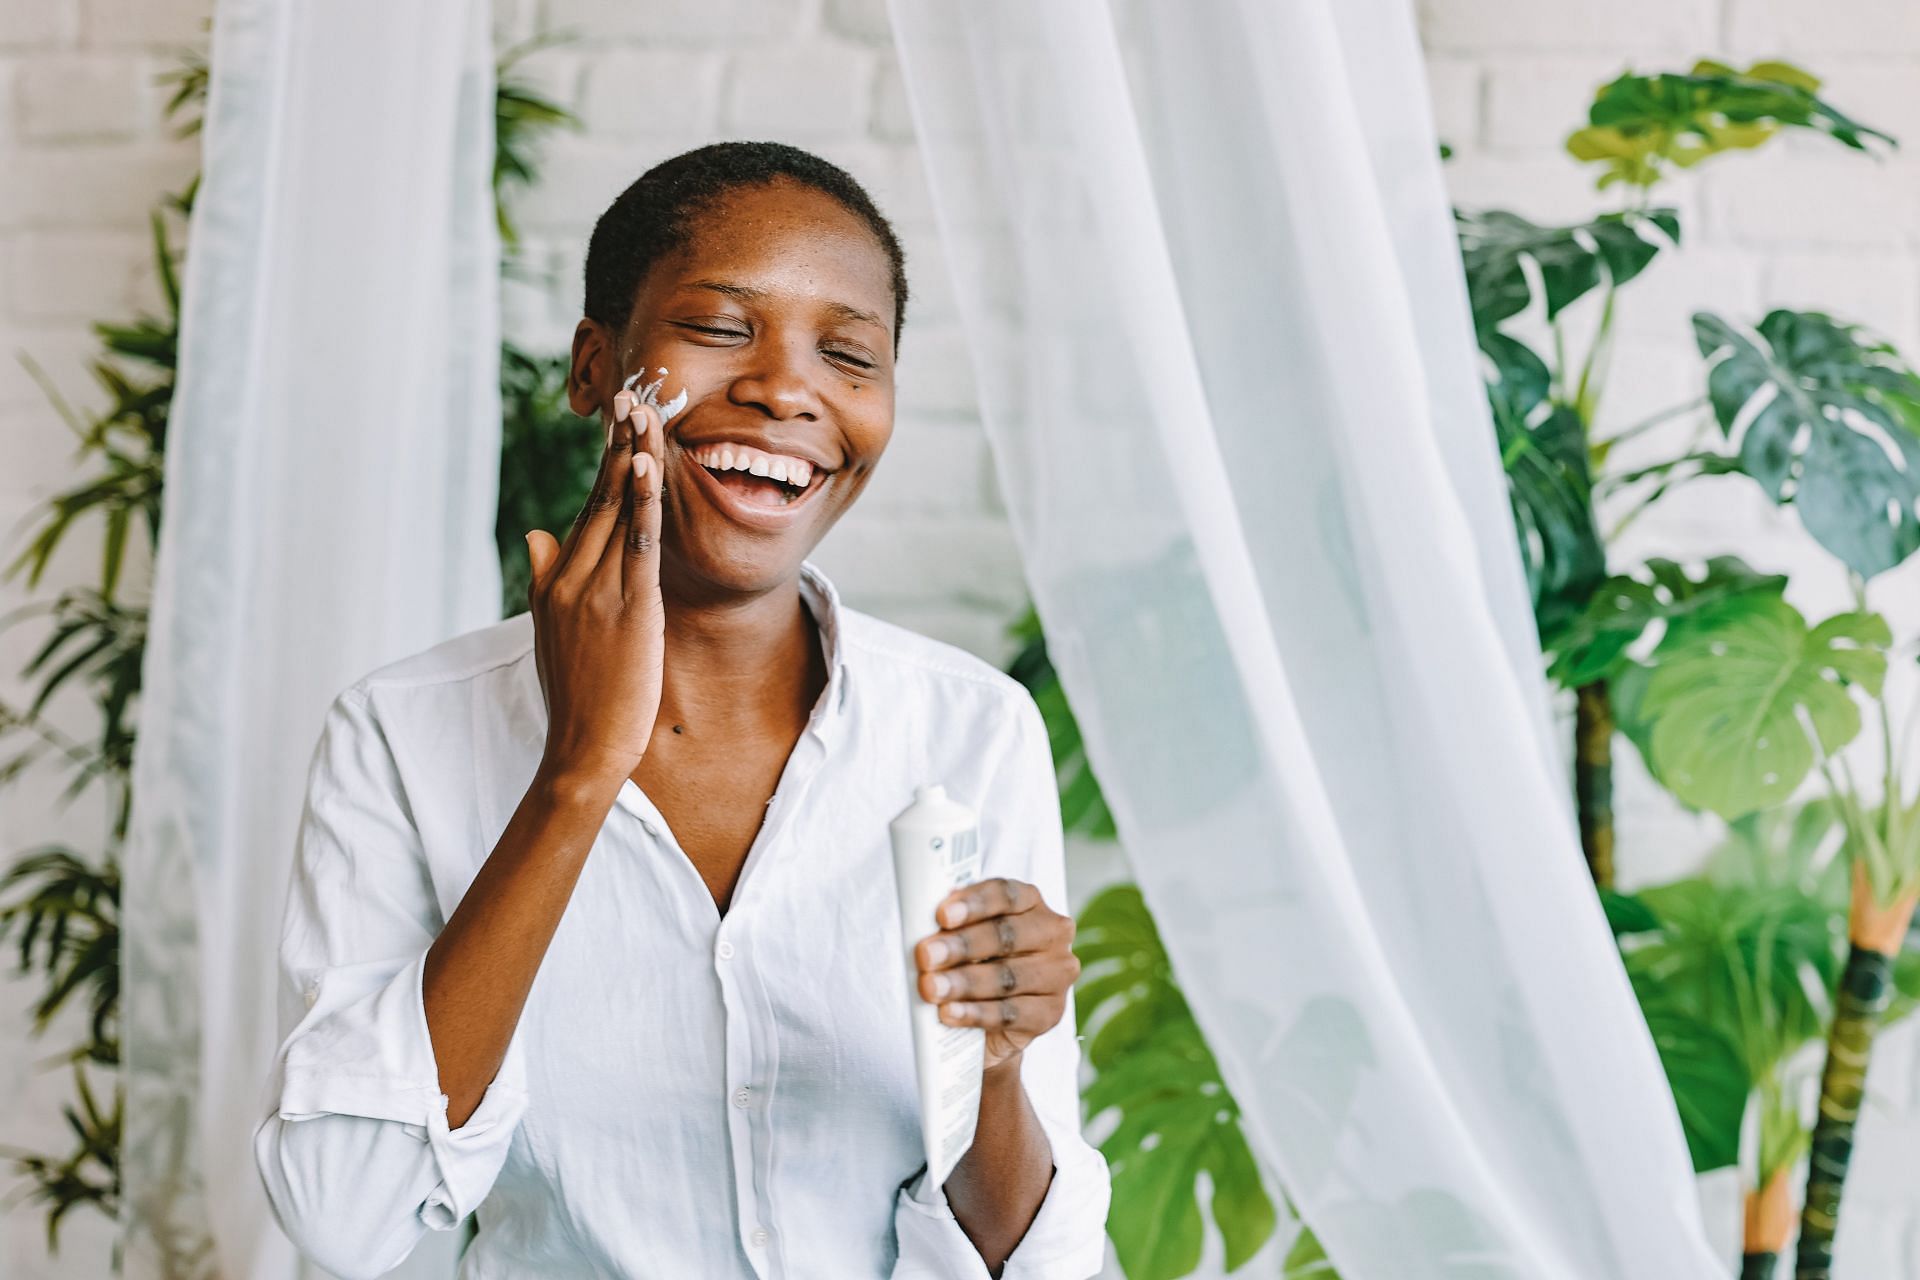 Those with sensitive skin can boost their skin&#039;s hydration and rebuild its barrier by applying a moisturizer. (Image via Pexels/ Roman Odinstov)